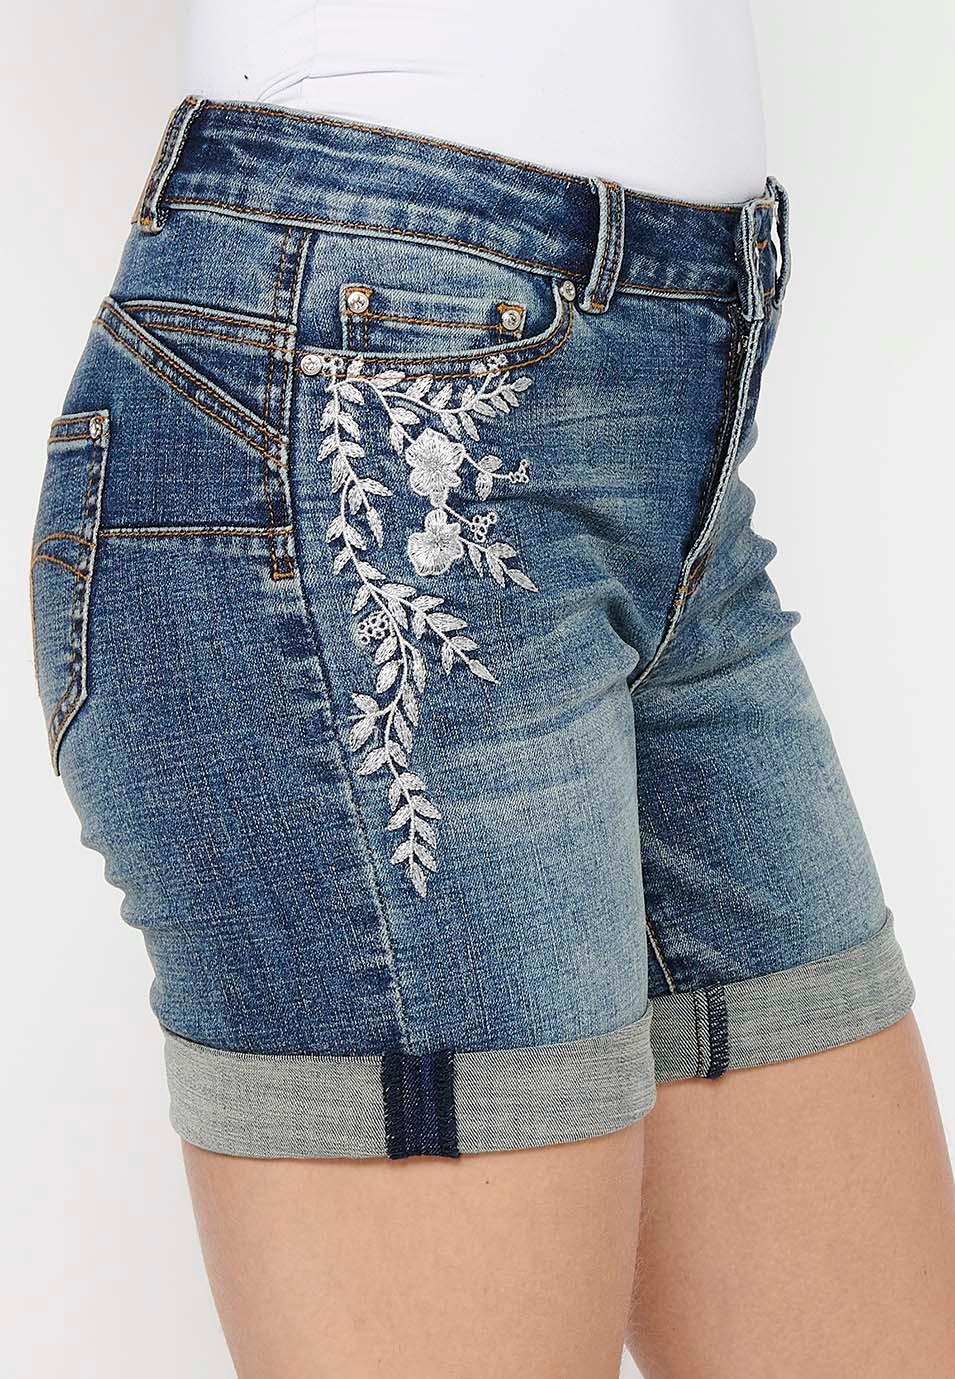 Short shorts with a turn-up finish with front zipper and button closure and blue floral embroidery for Women 7